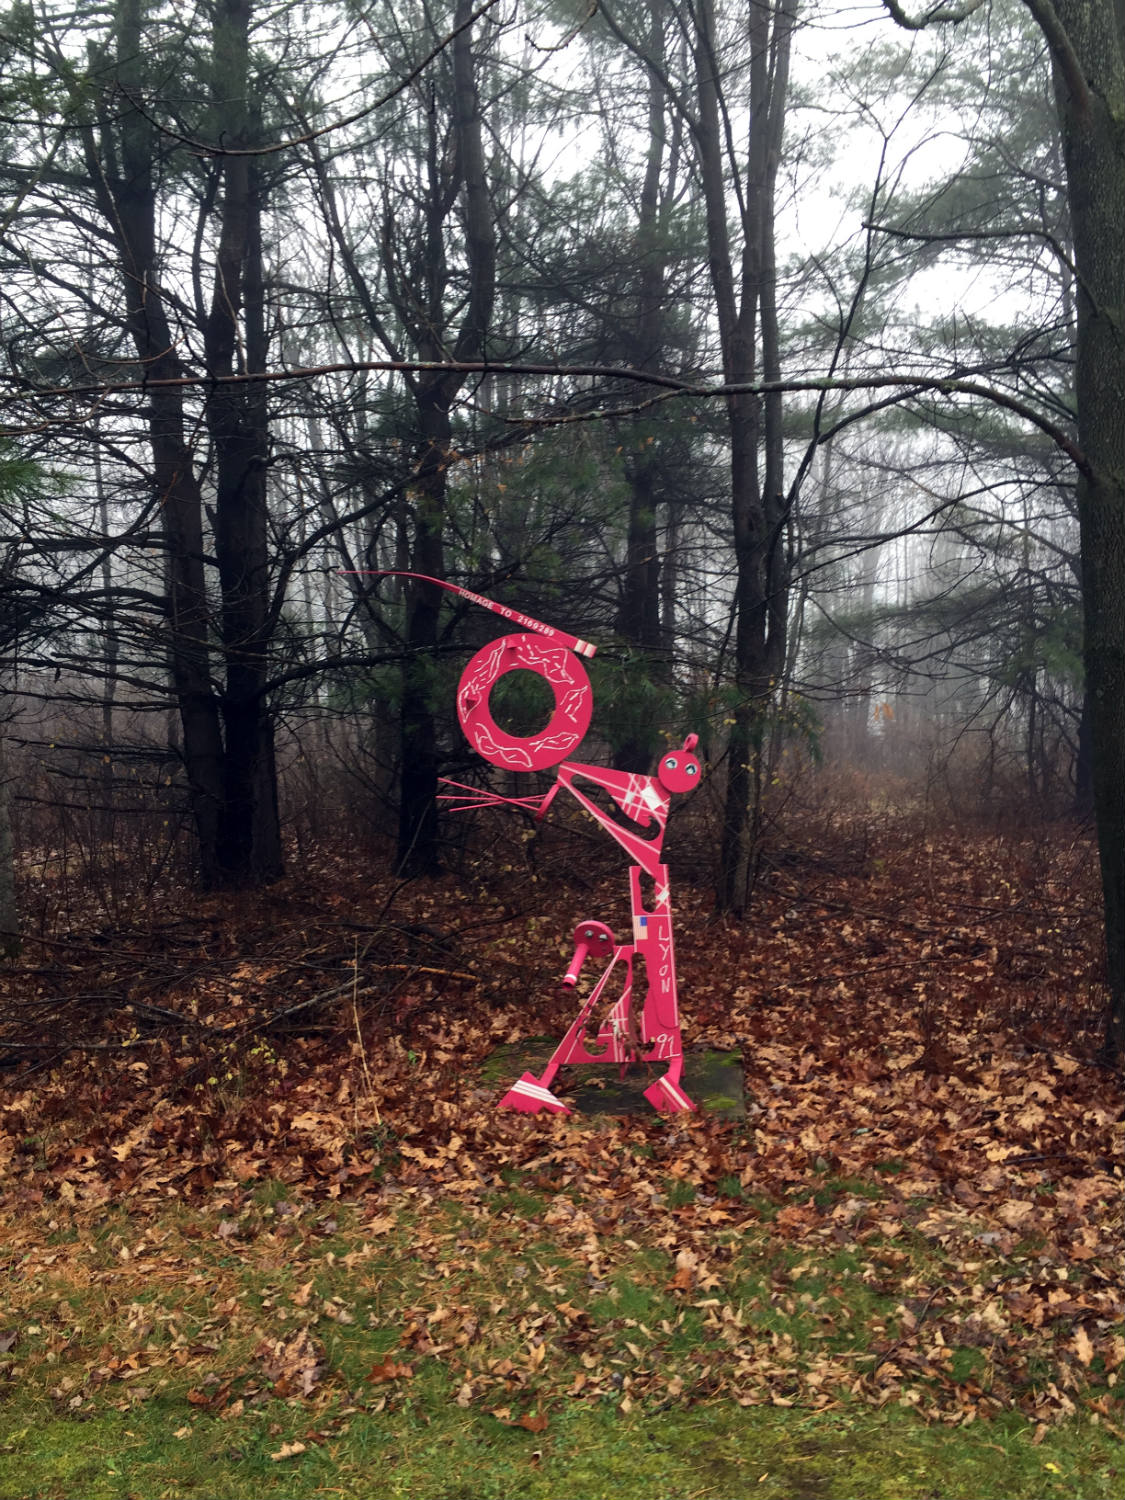 The C Lyon Sculpture Park in Horseheads, New York